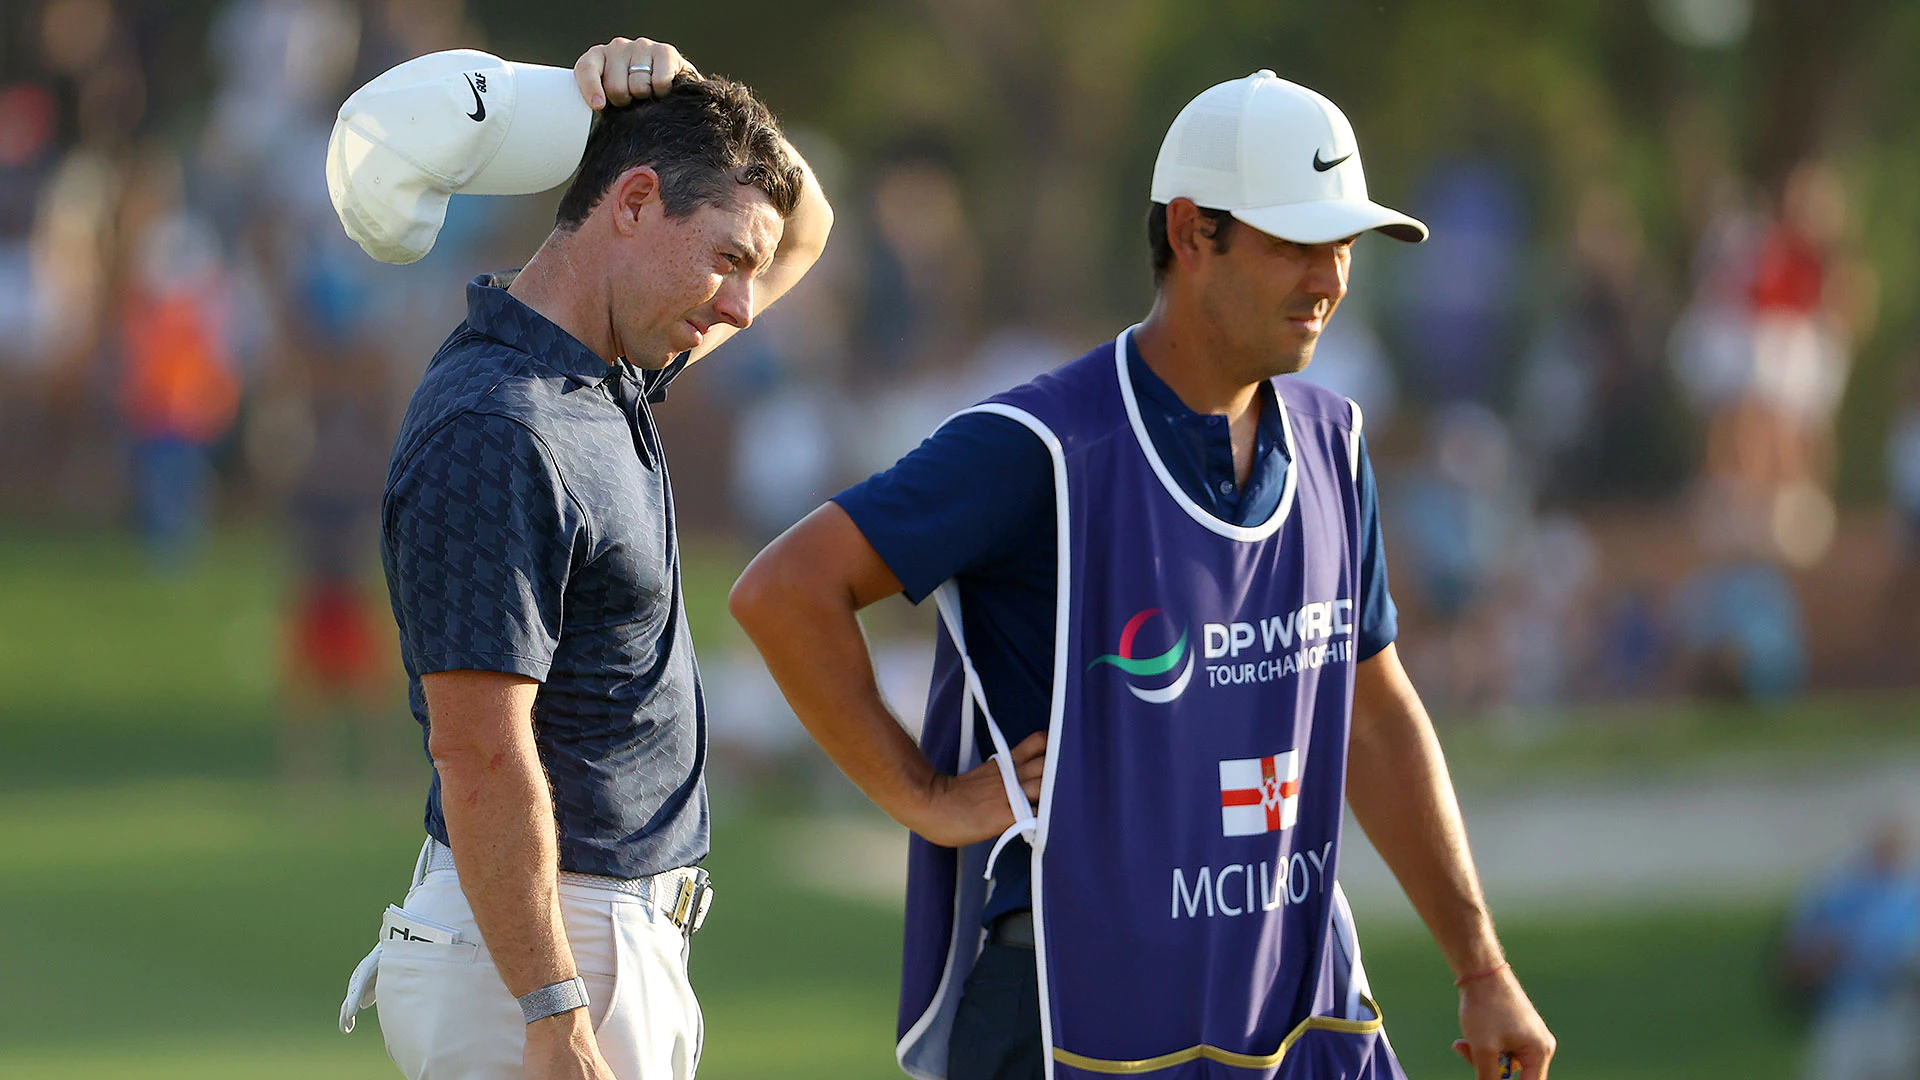 Clank off flagstick turns the tide for Rory McIlroy, who closes Dubai in 74